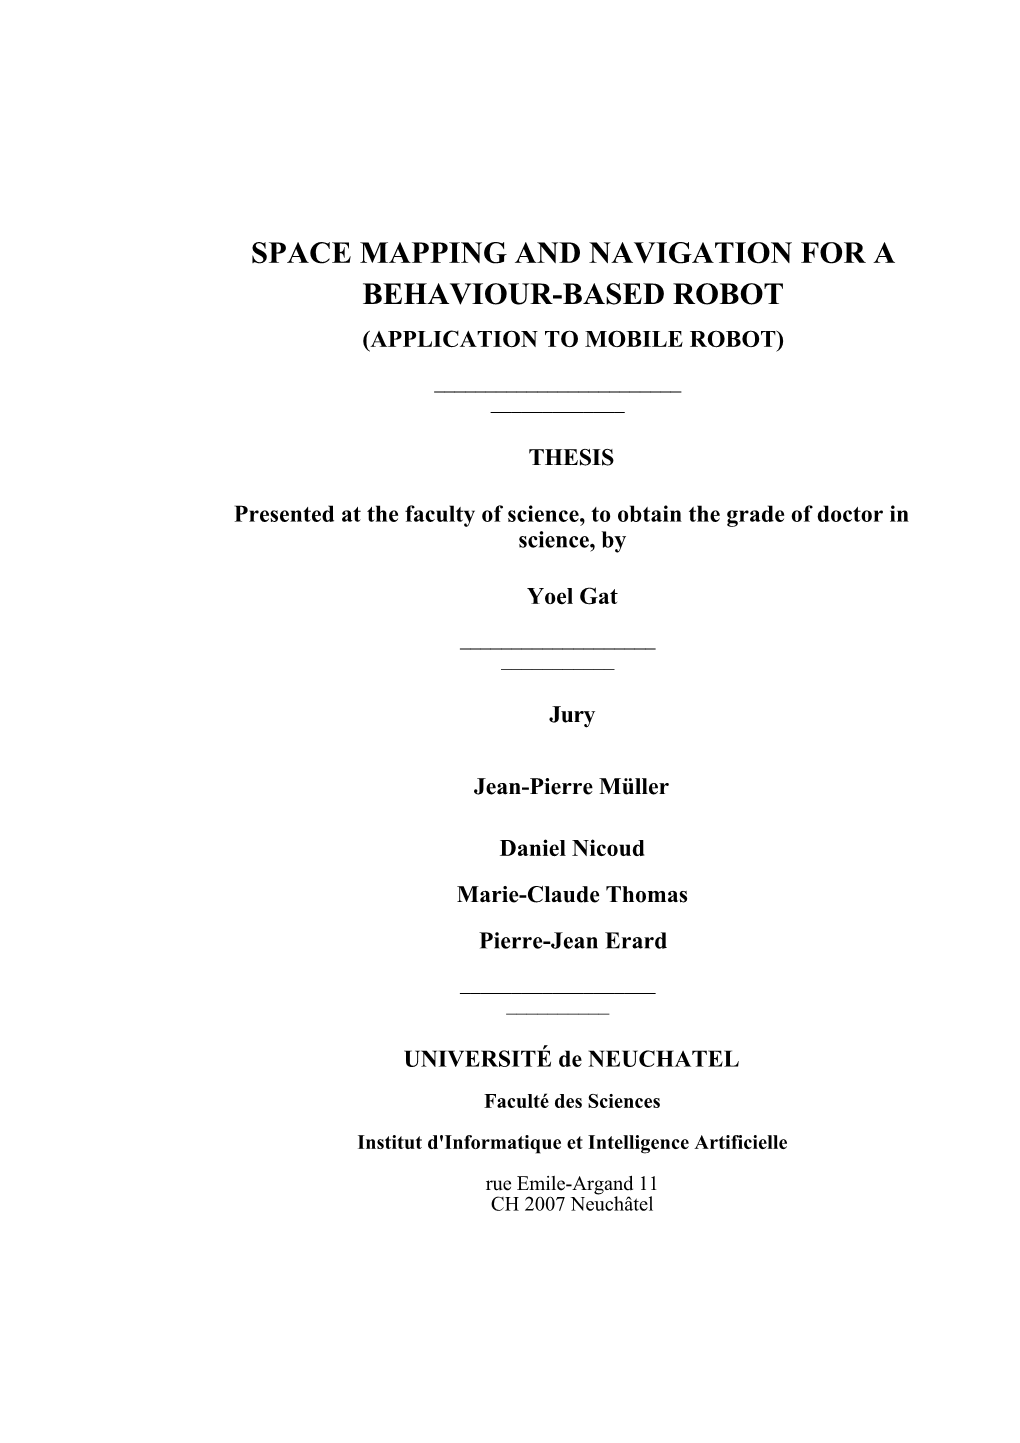 Space Mapping and Navigation for a Behaviour-Based Robot (Application to Mobile Robot) ______